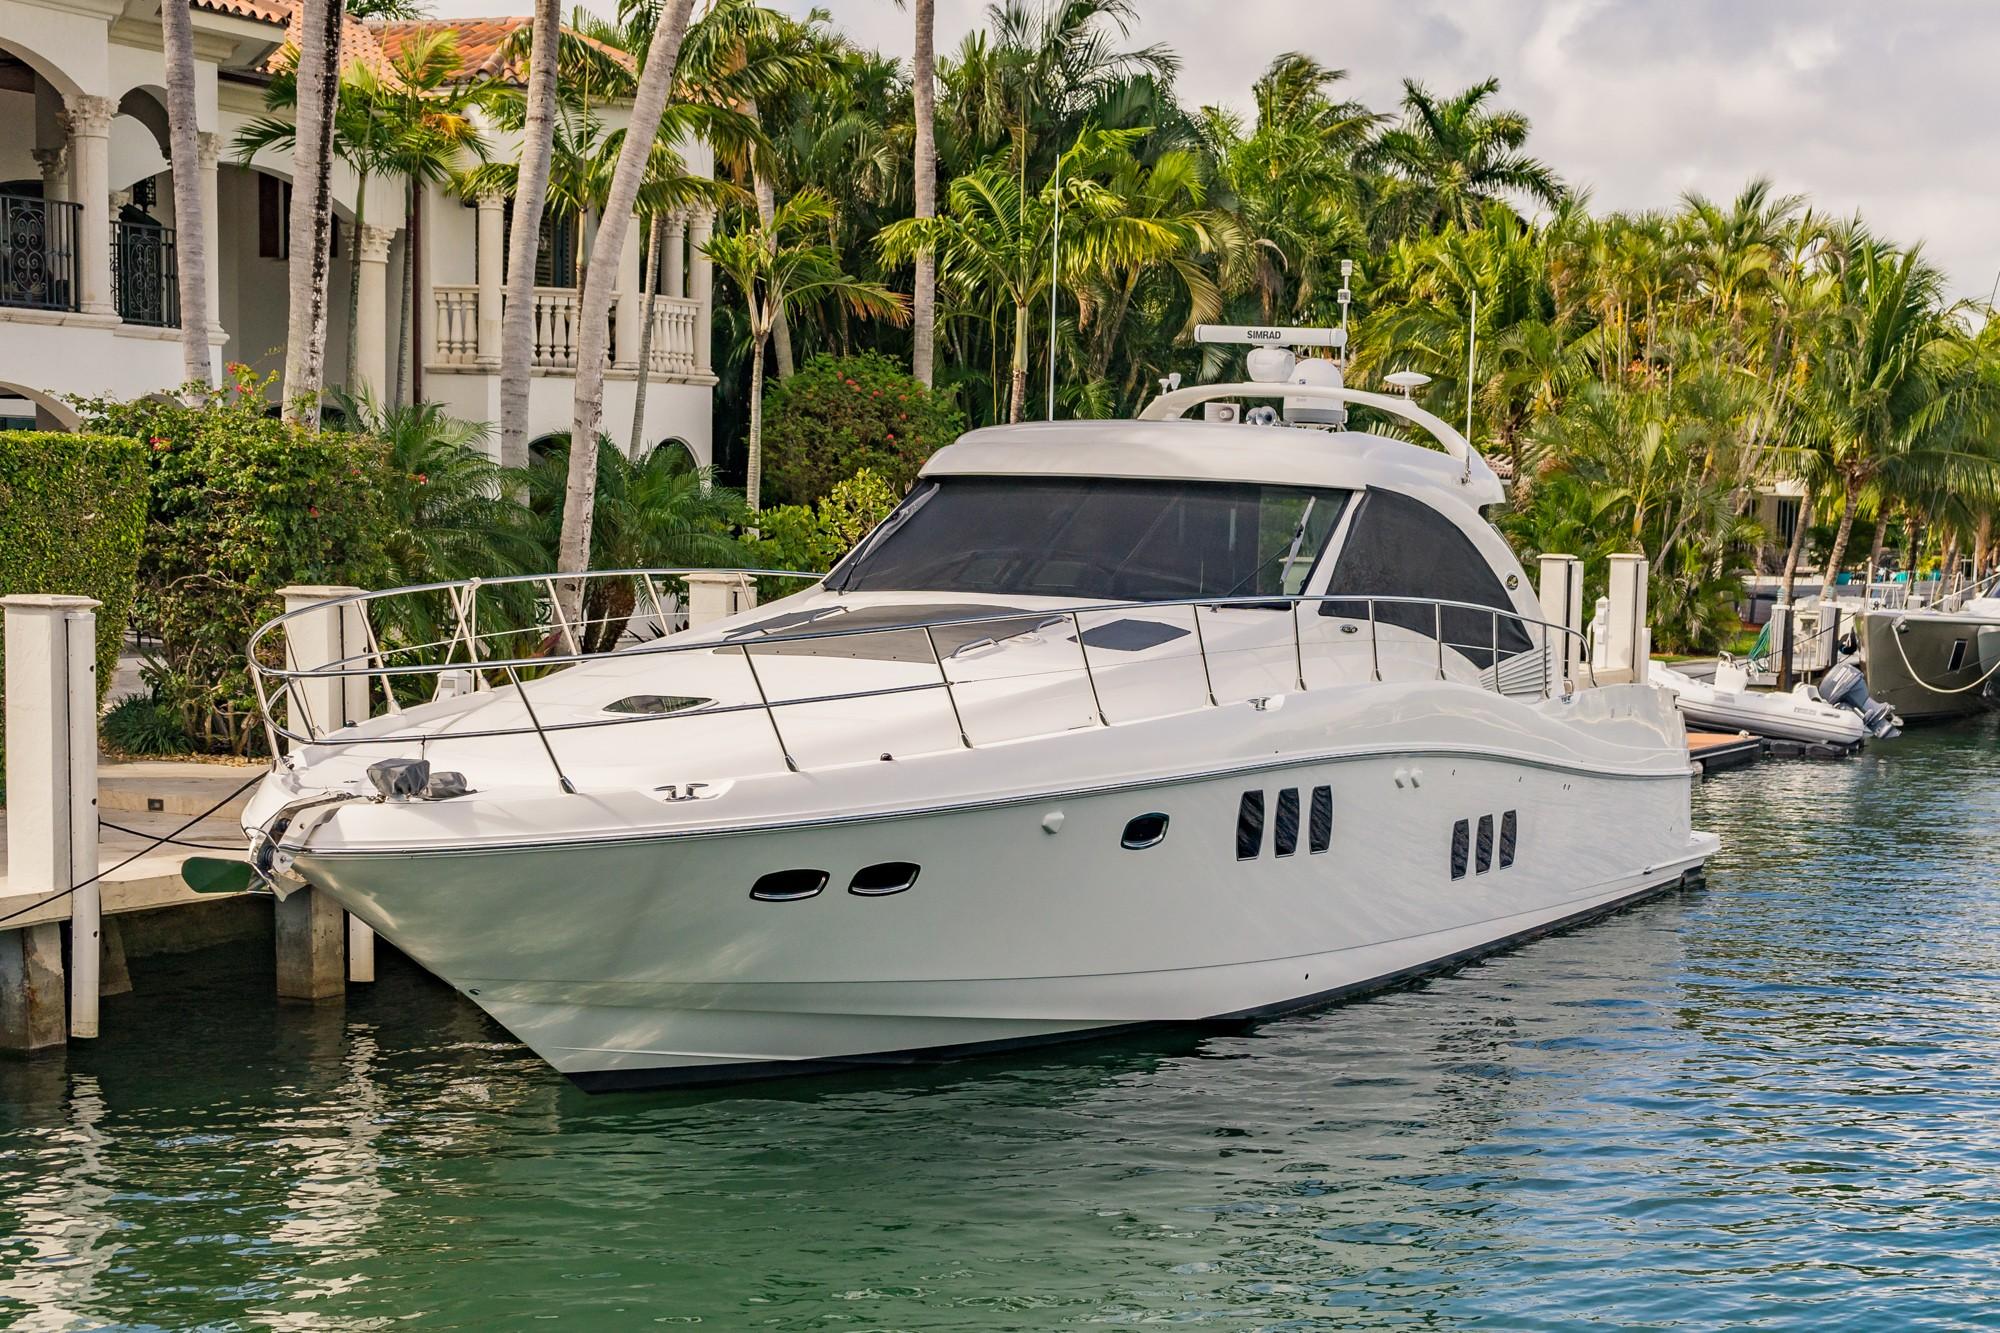 60 foot cruiser yacht for sale